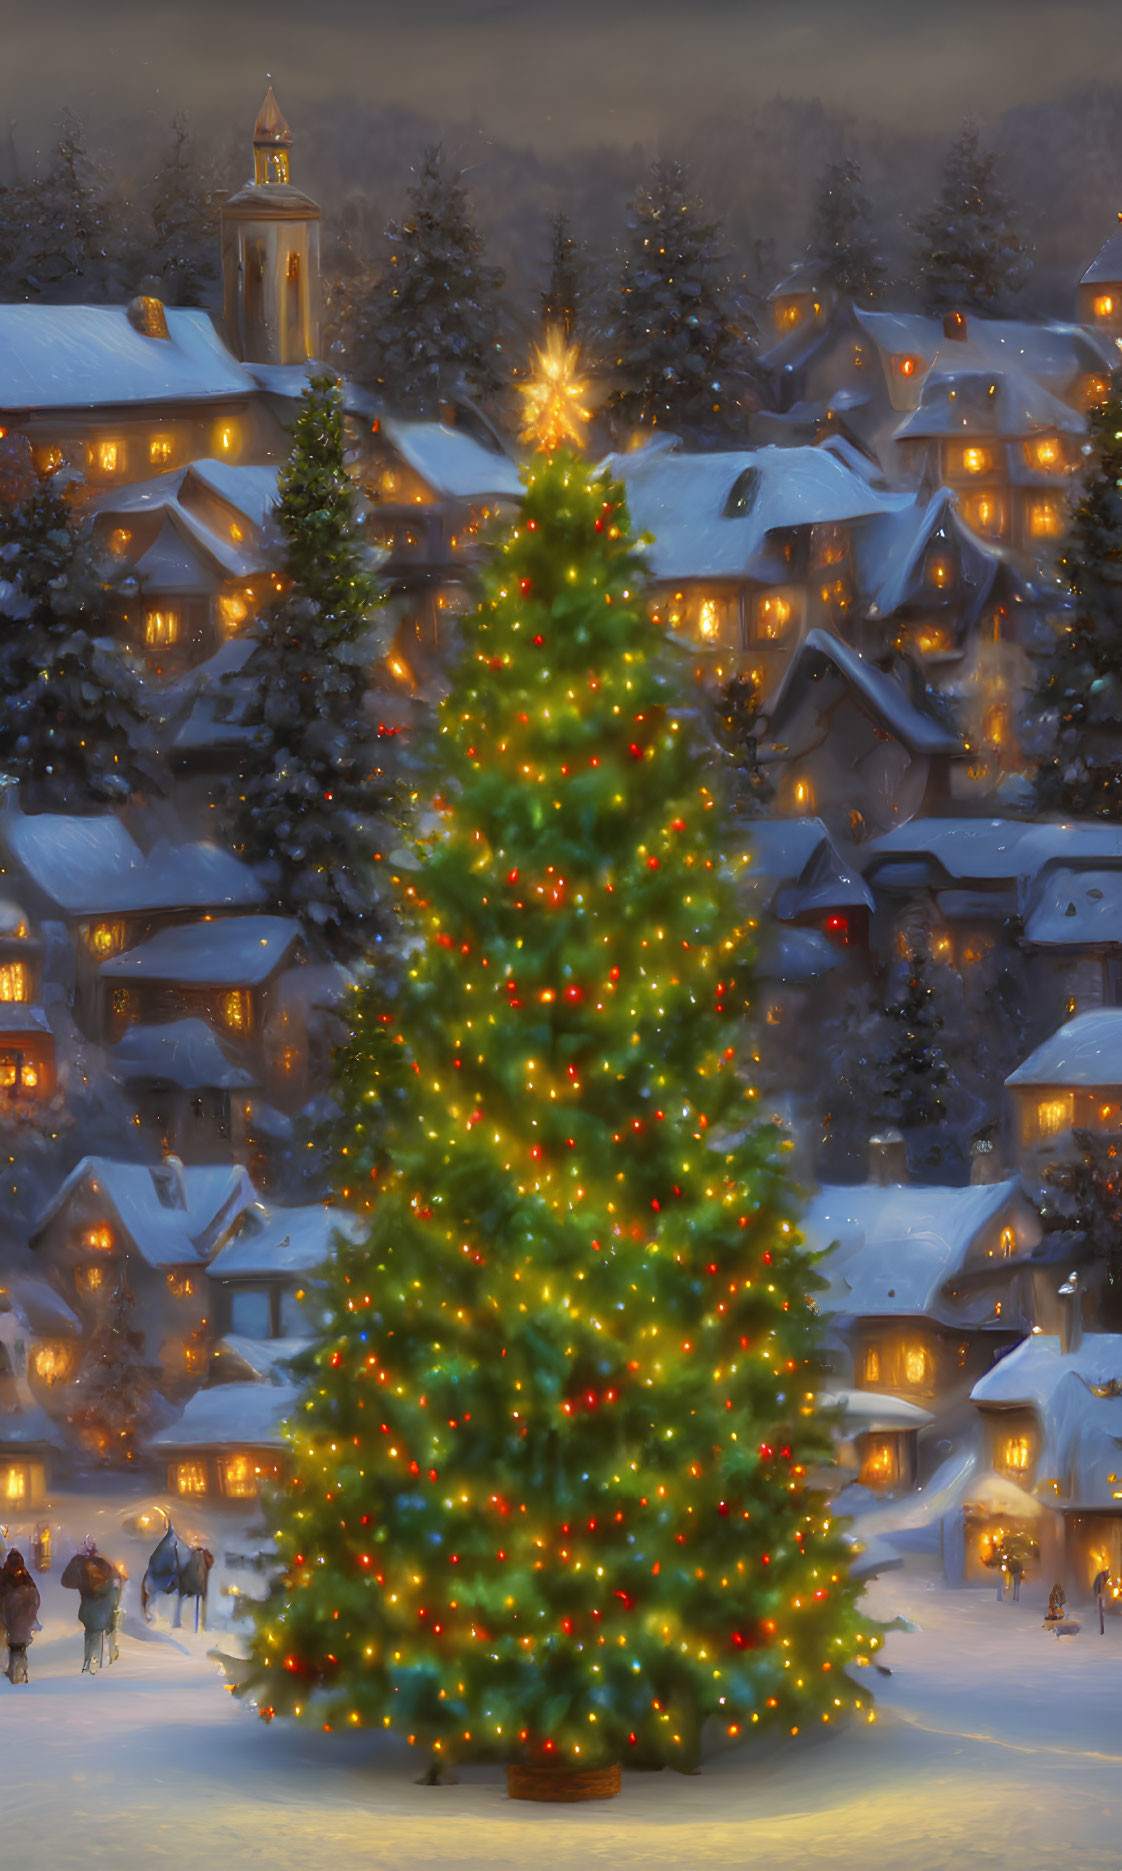 Colorful lights adorn tall Christmas tree in snowy village at dusk